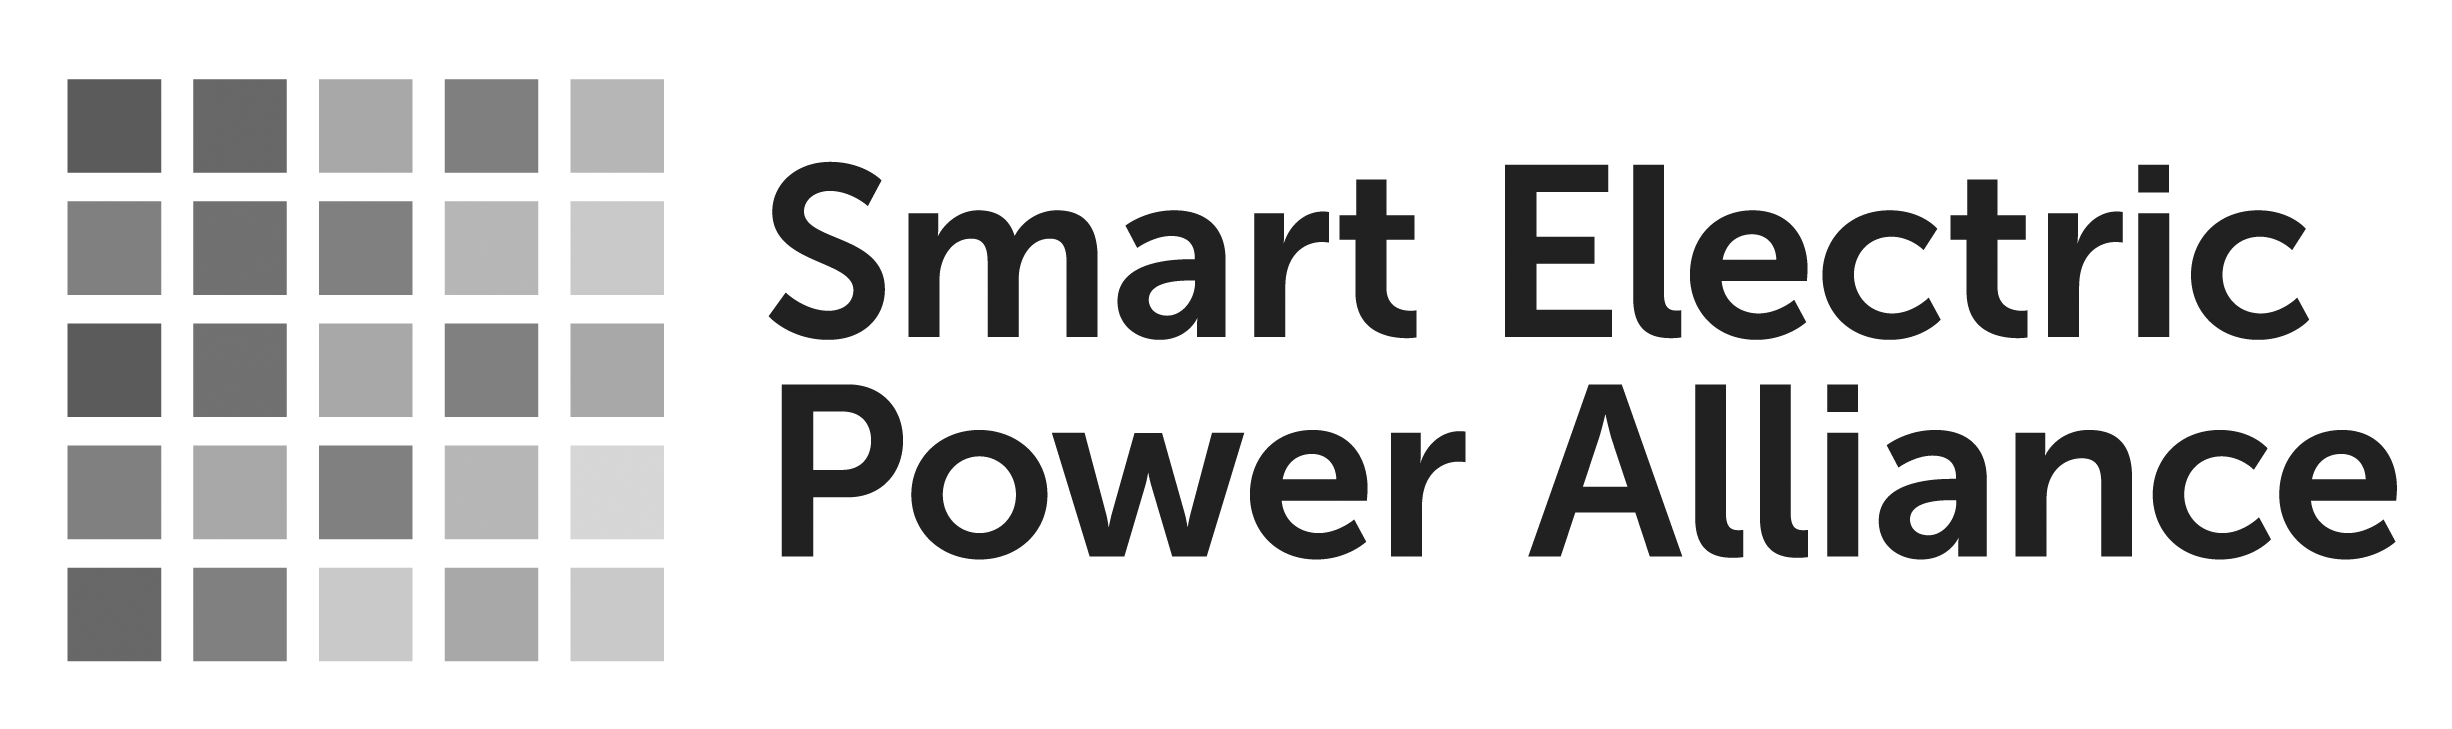 Smart-Electric-Power-Alliance-grayscale